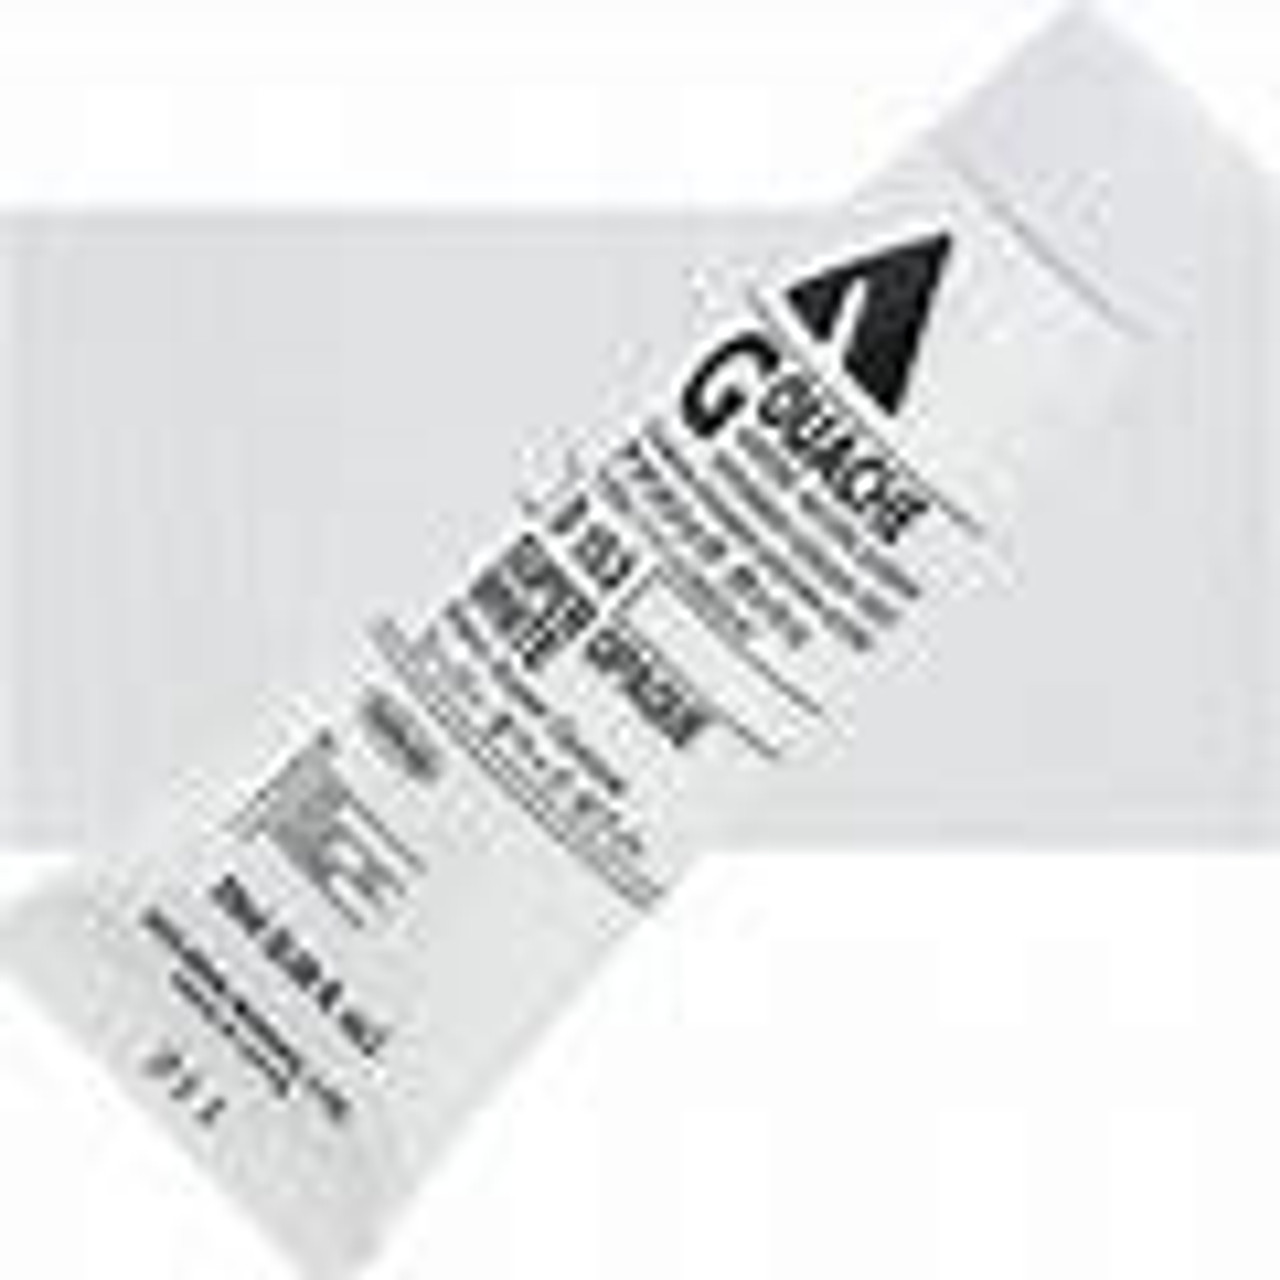 Holbein Acrylic Ink Super Opaque White